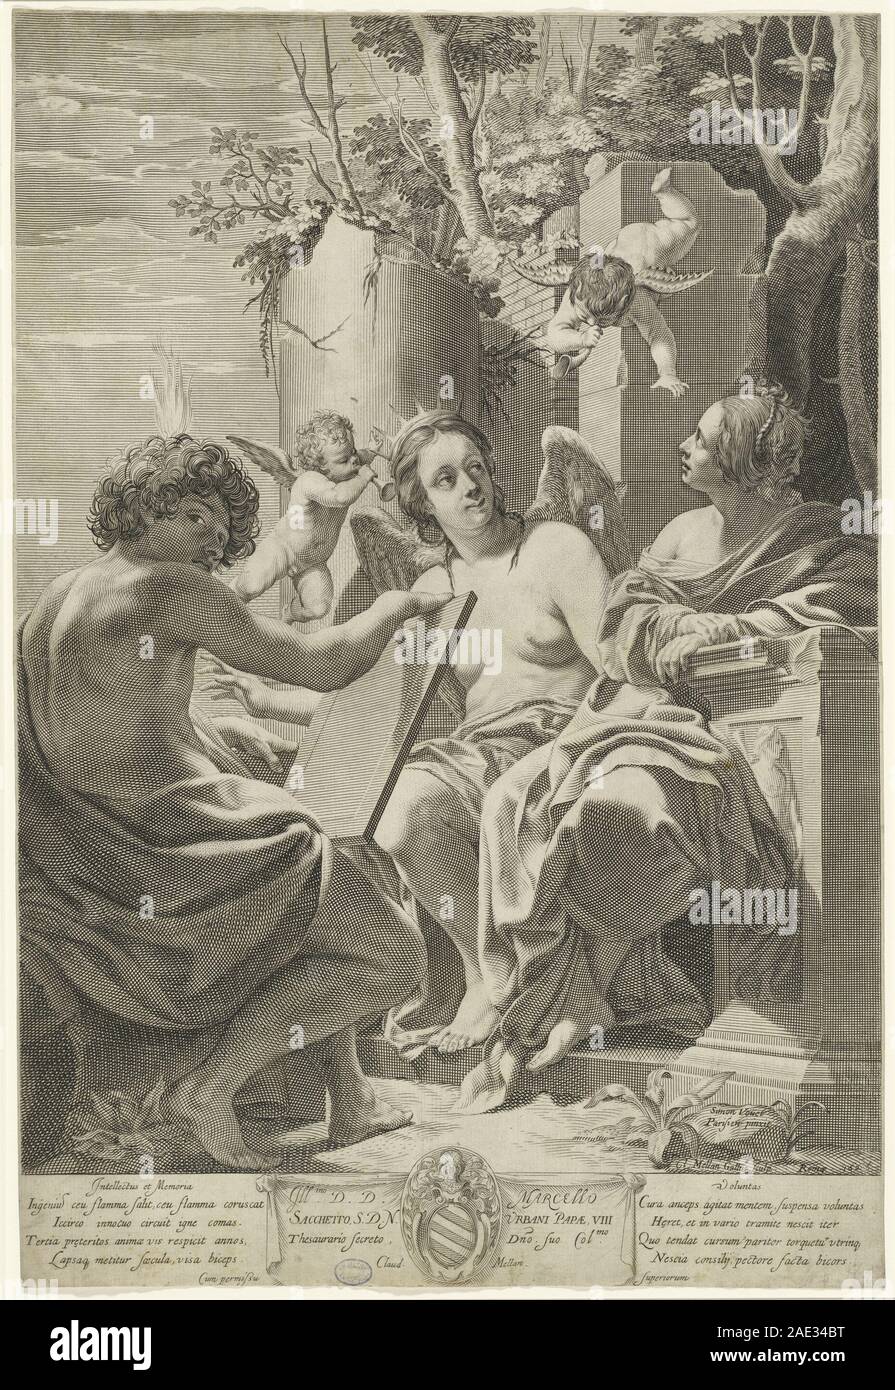 Allegory of Intellect, Memory, and Will; 1625date Claude Mellan after Simon Vouet, Allegory of Intellect, Memory, and Will, 1625 Stock Photo